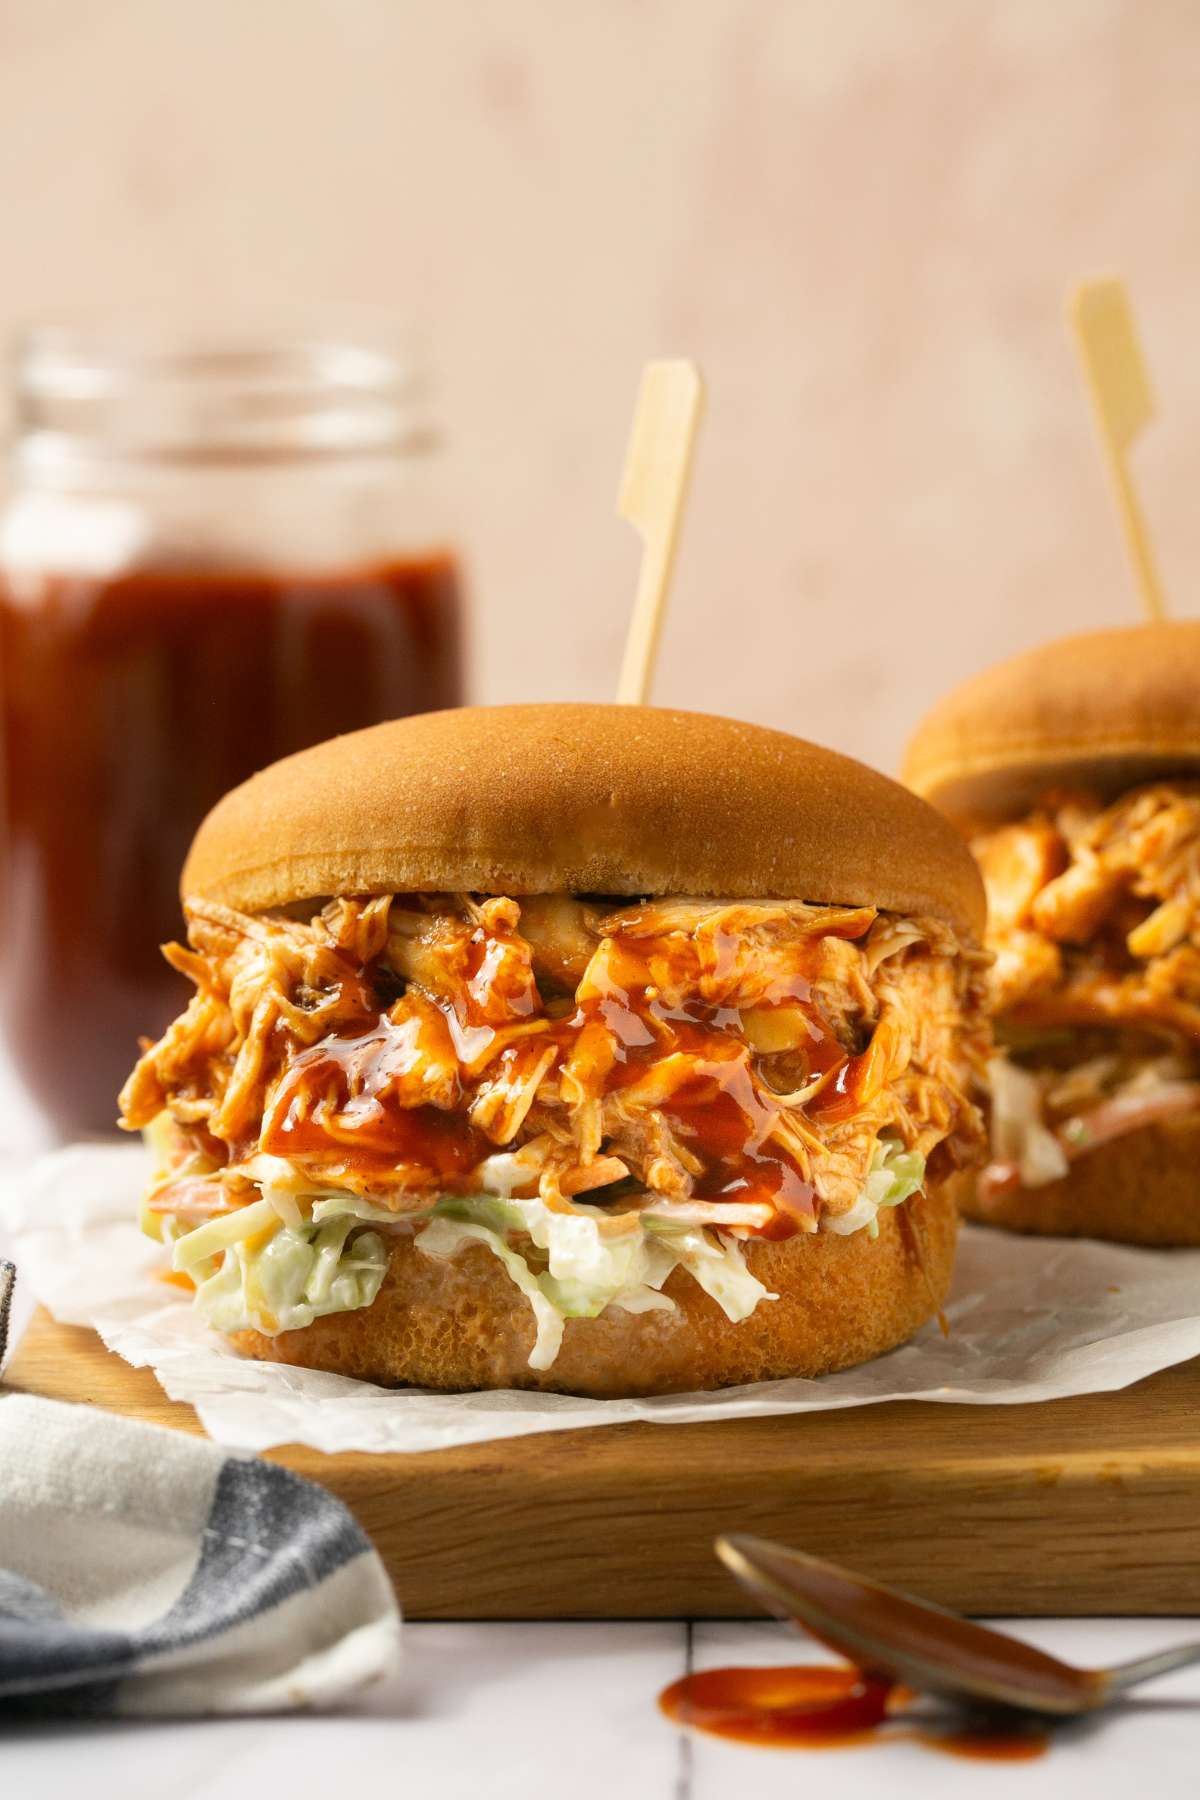 A shredded bbq chicken crock pot sandwich on the table with coleslaw and a spoon dripping bbq sauce on the side.